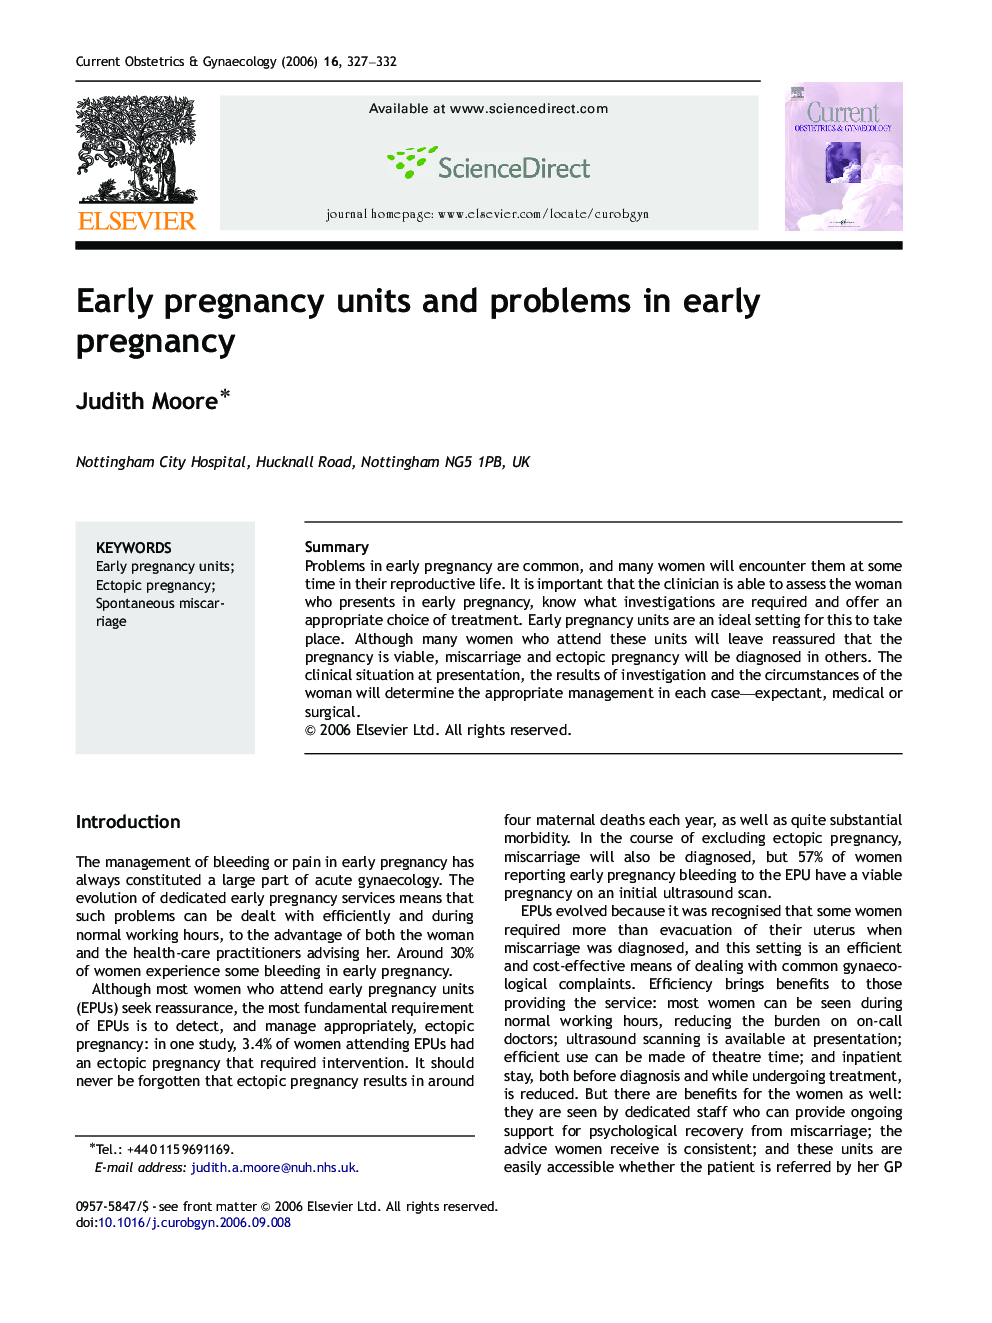 Early pregnancy units and problems in early pregnancy